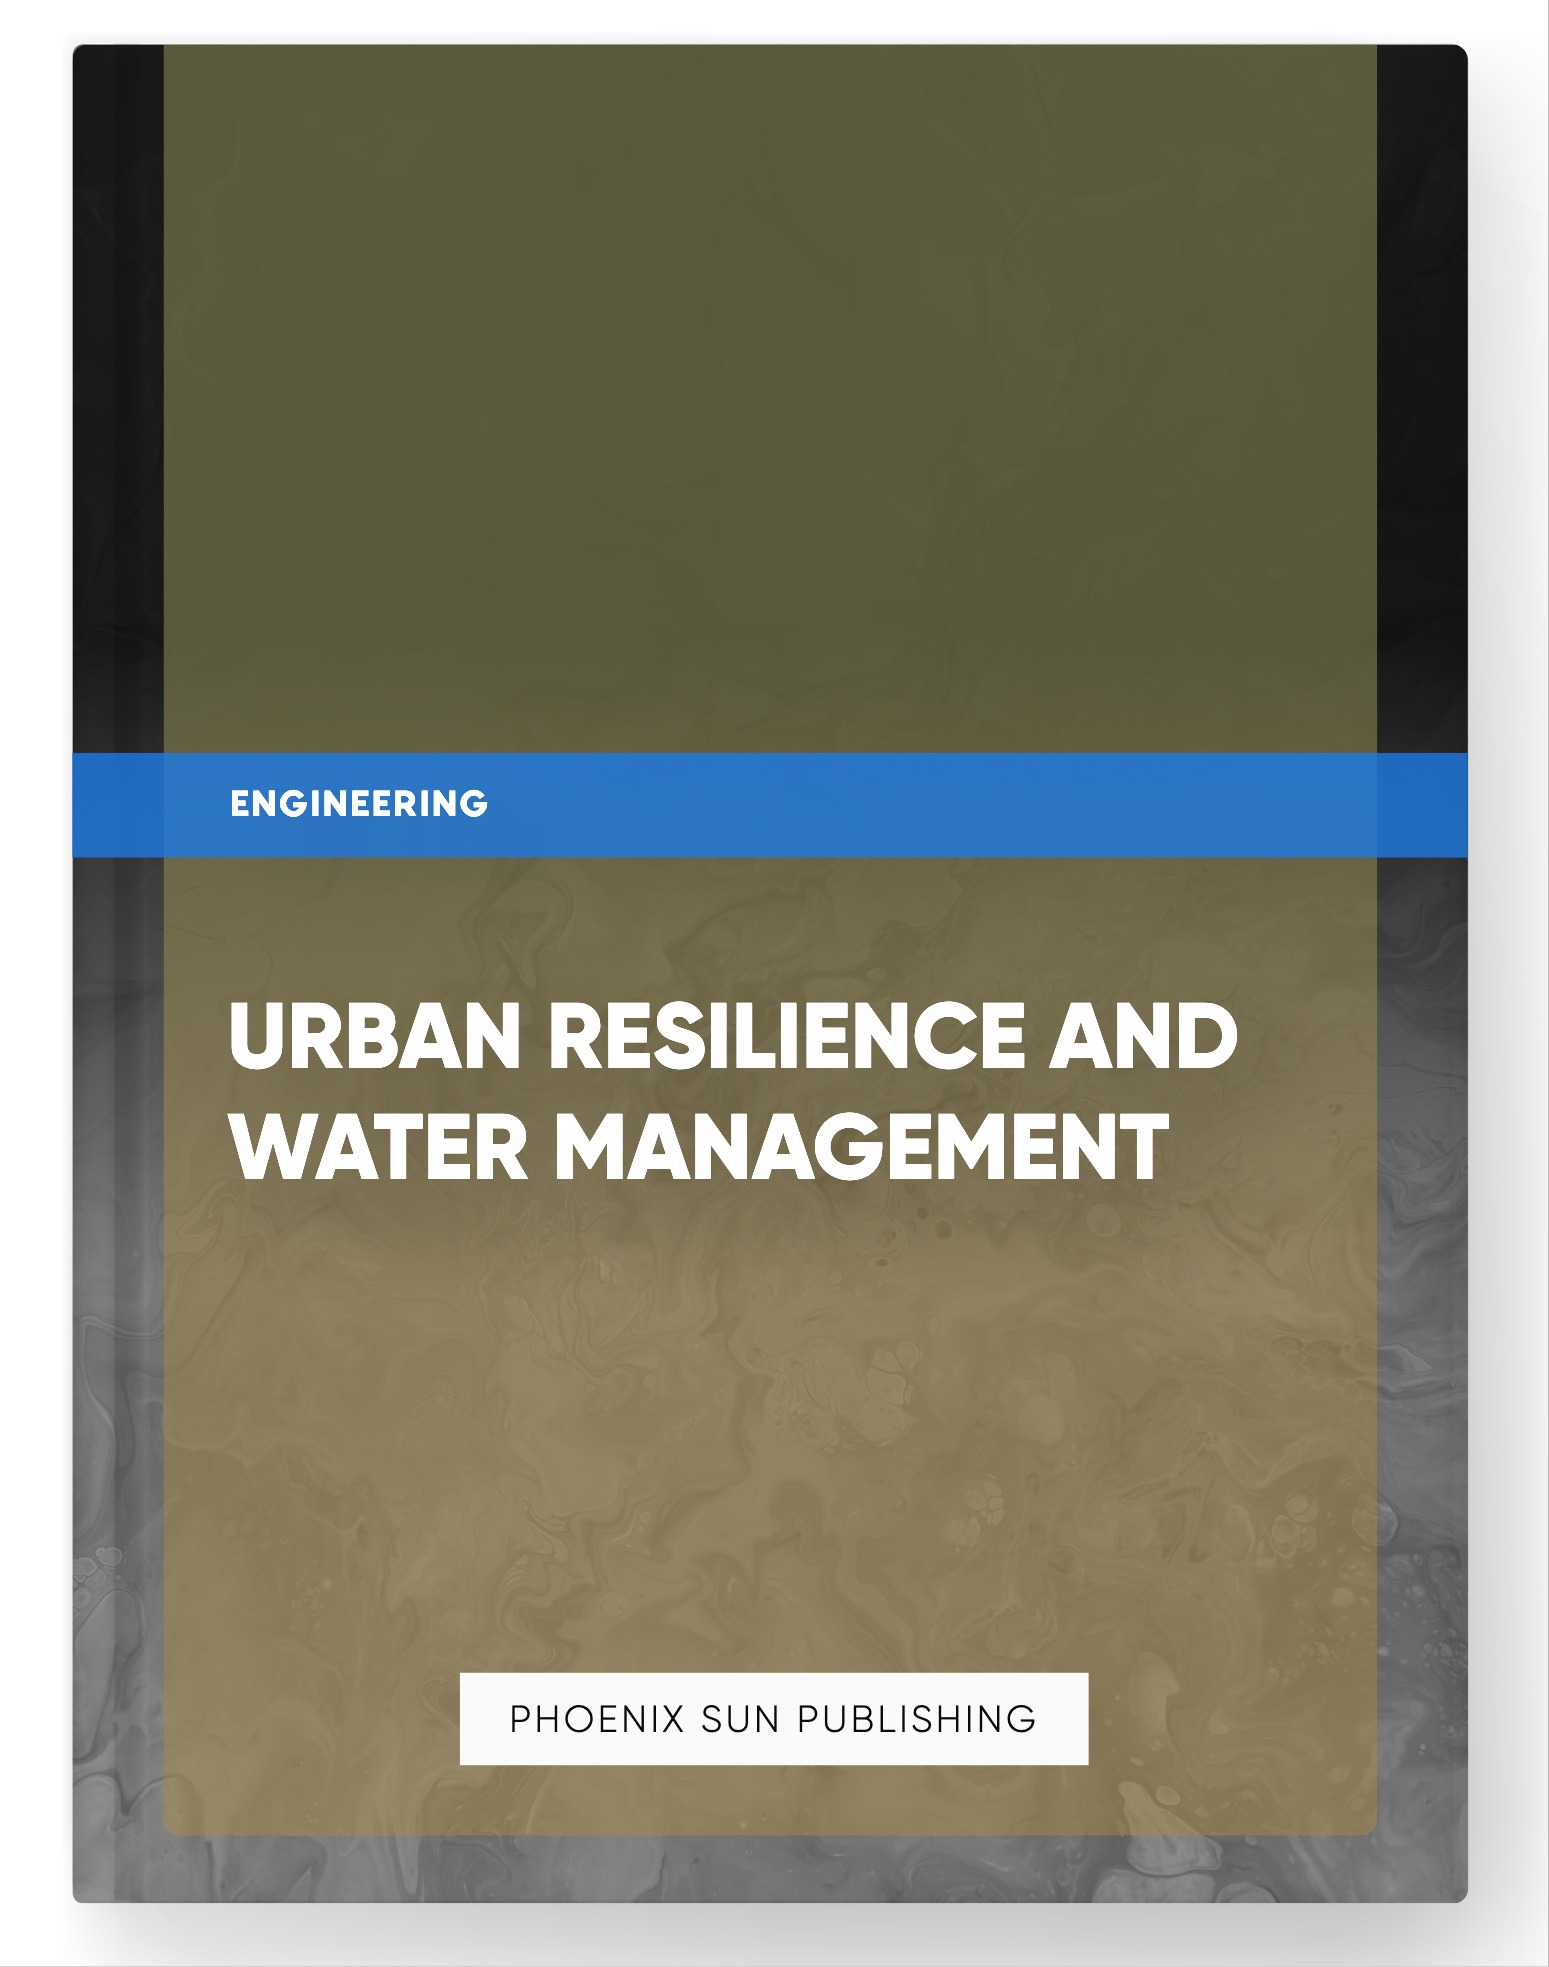 Urban Resilience and Water Management